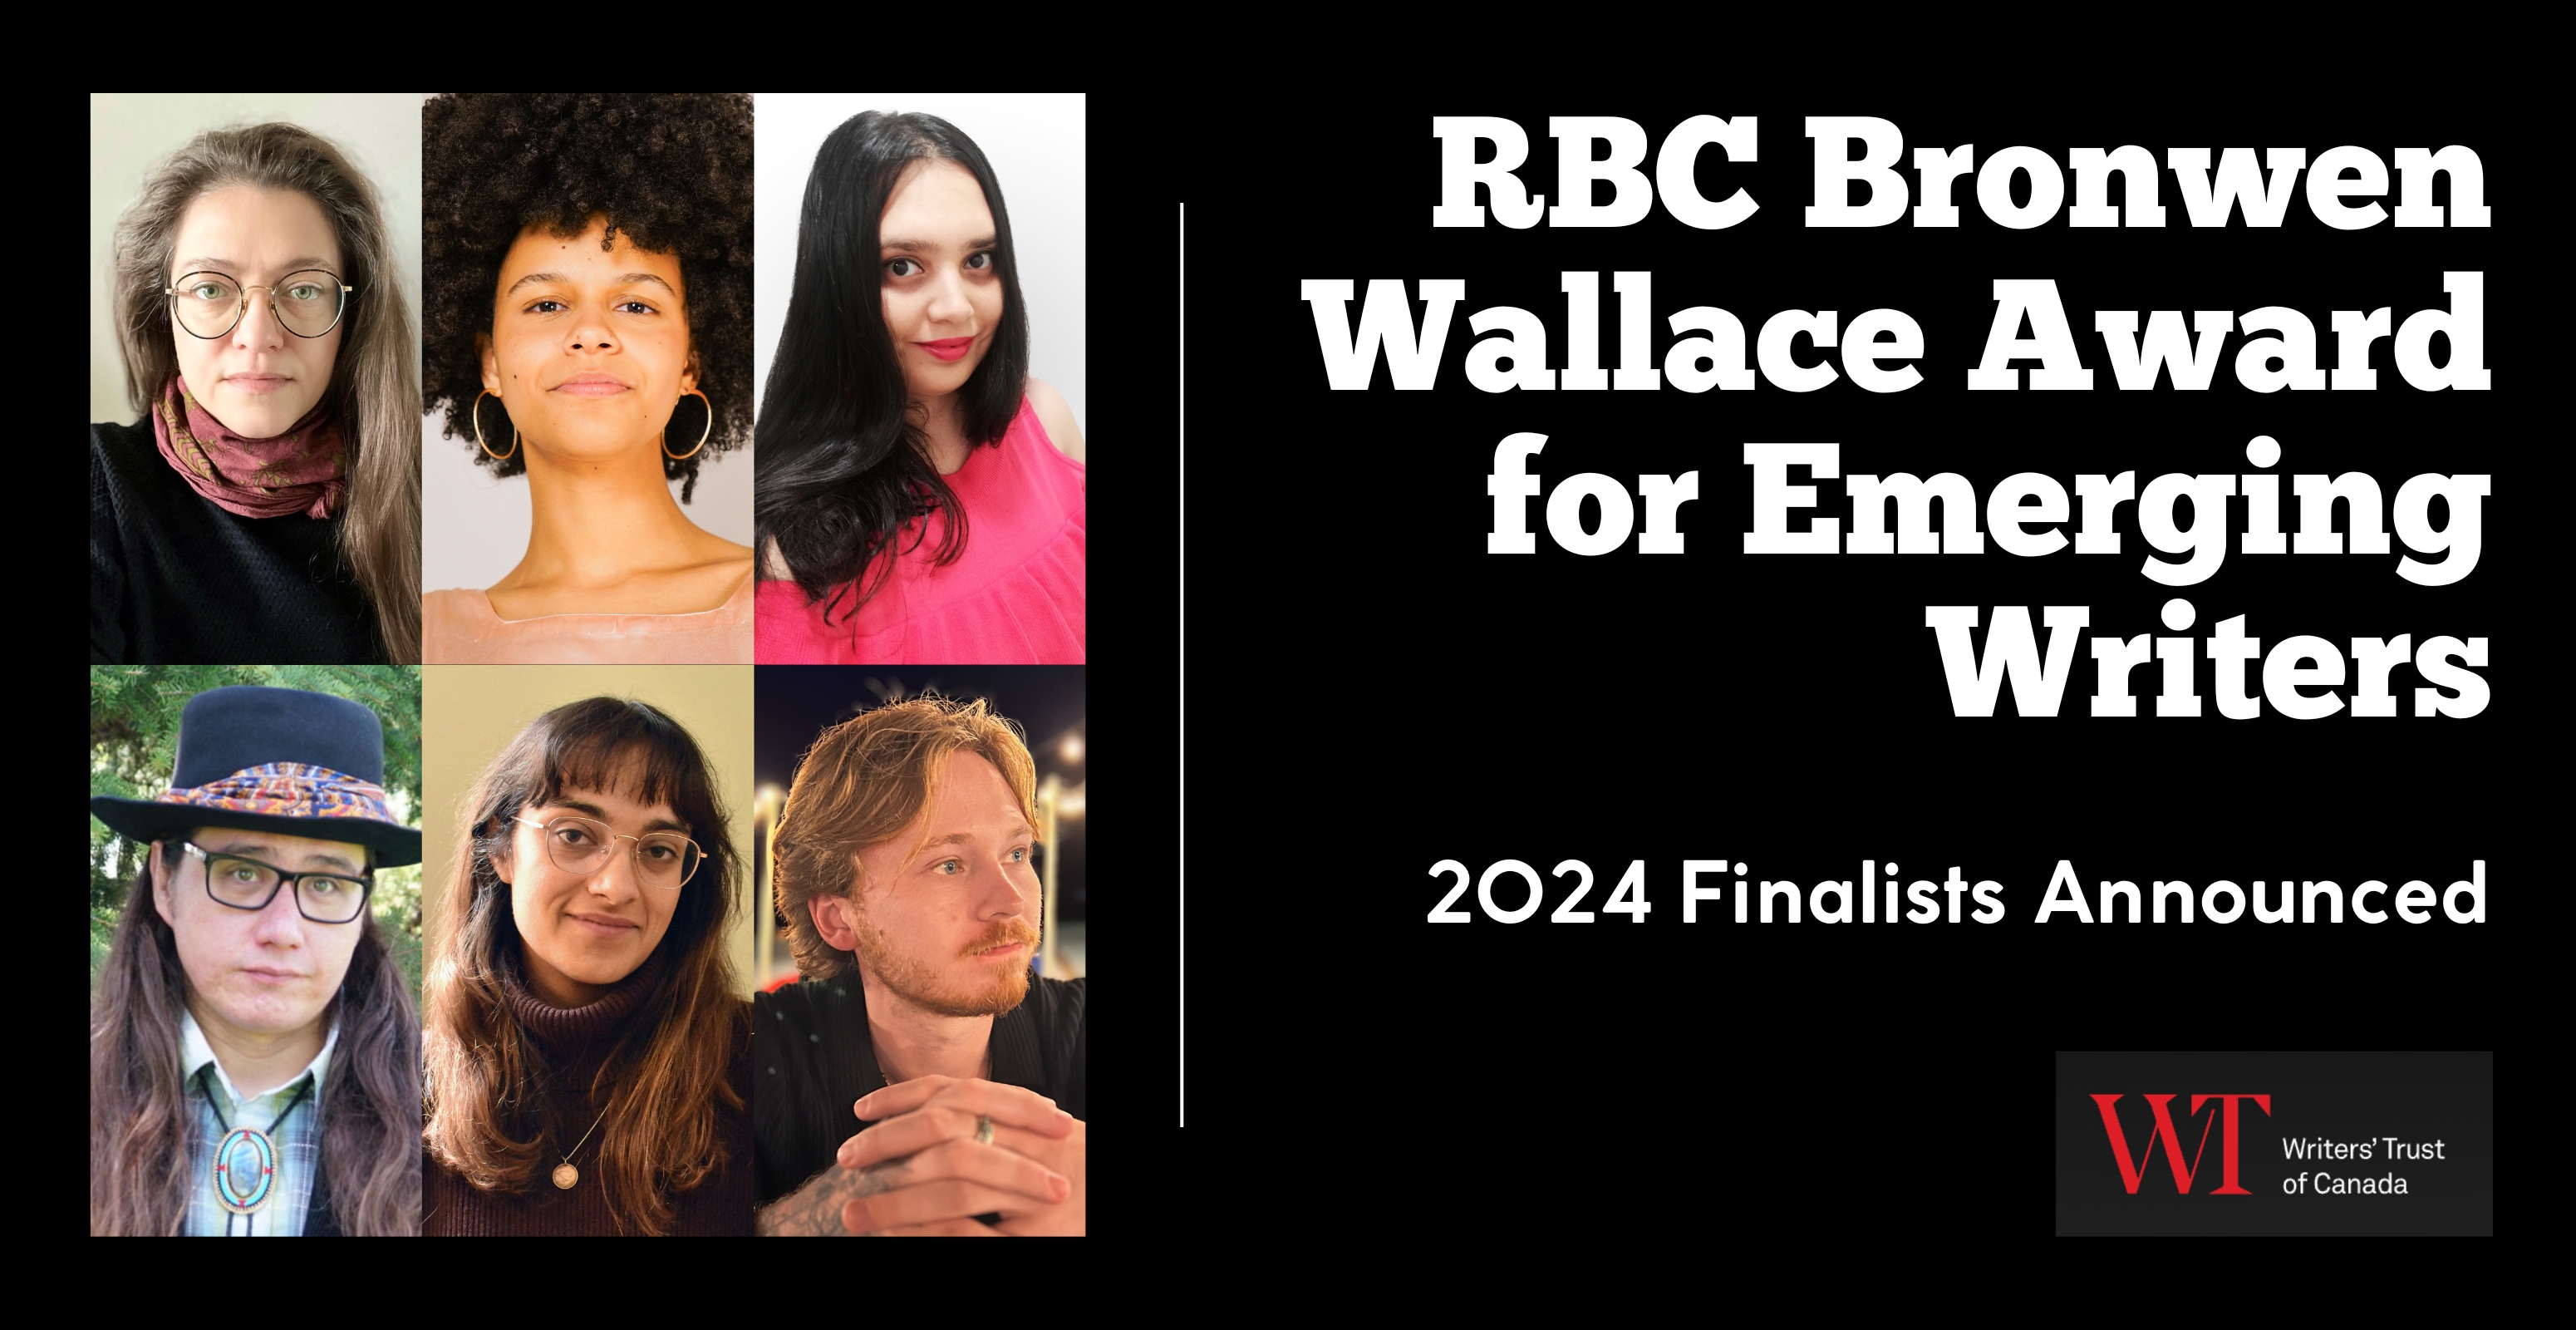 RBC Bronwen Wallace Award for Emerging Writers - Finalists Announced - Banner image with black background and six poetry and fiction author photos for finalists at left, with text at right and Writers' Trust logo at bottom corner.